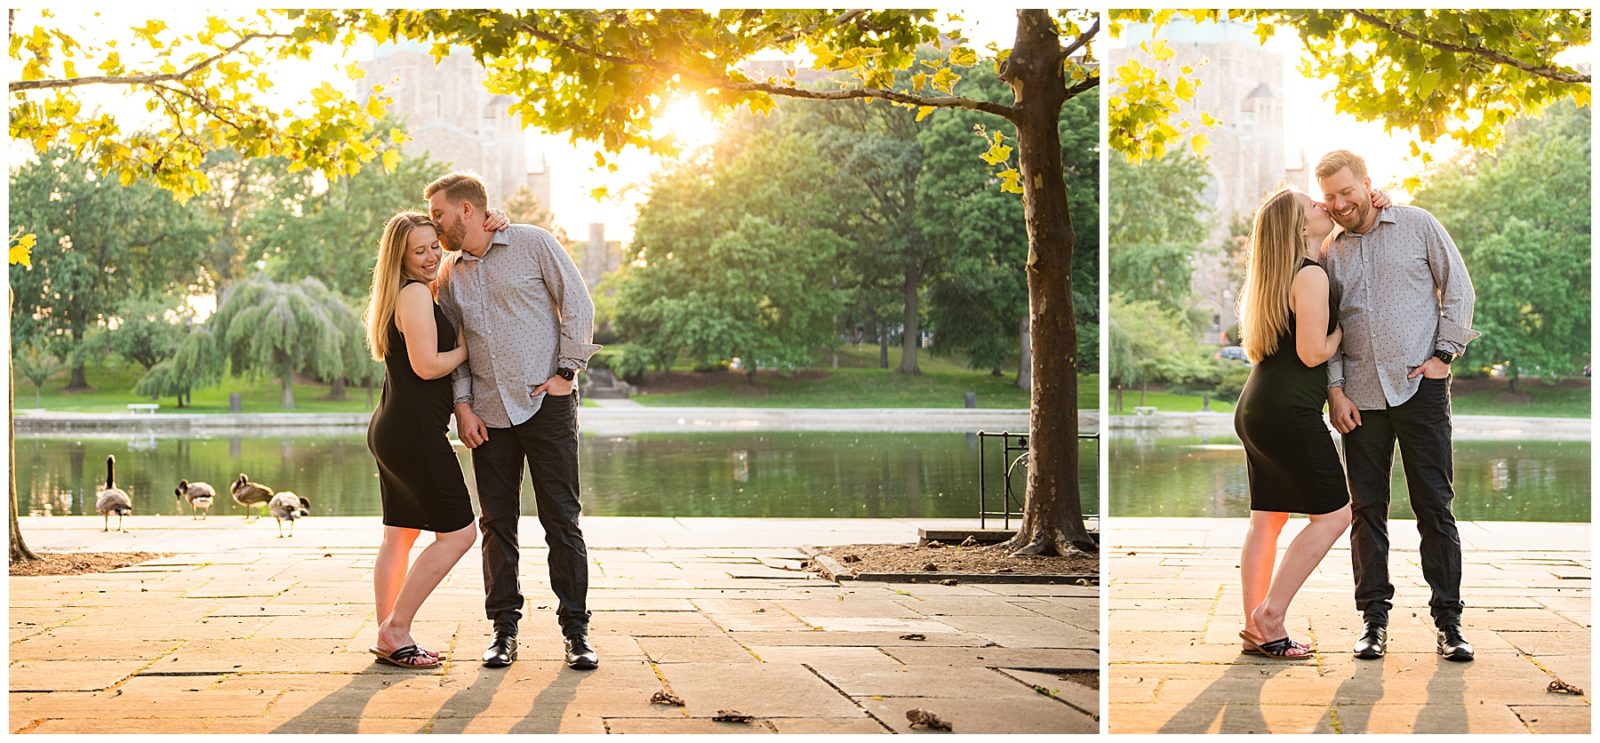 A Cleveland engagement session, wade lagoon photos, summer photos, sweet and candid photos, romantic engagement photos, outfit ideas, soft floral dress, pond photos, golden hour, glowy light